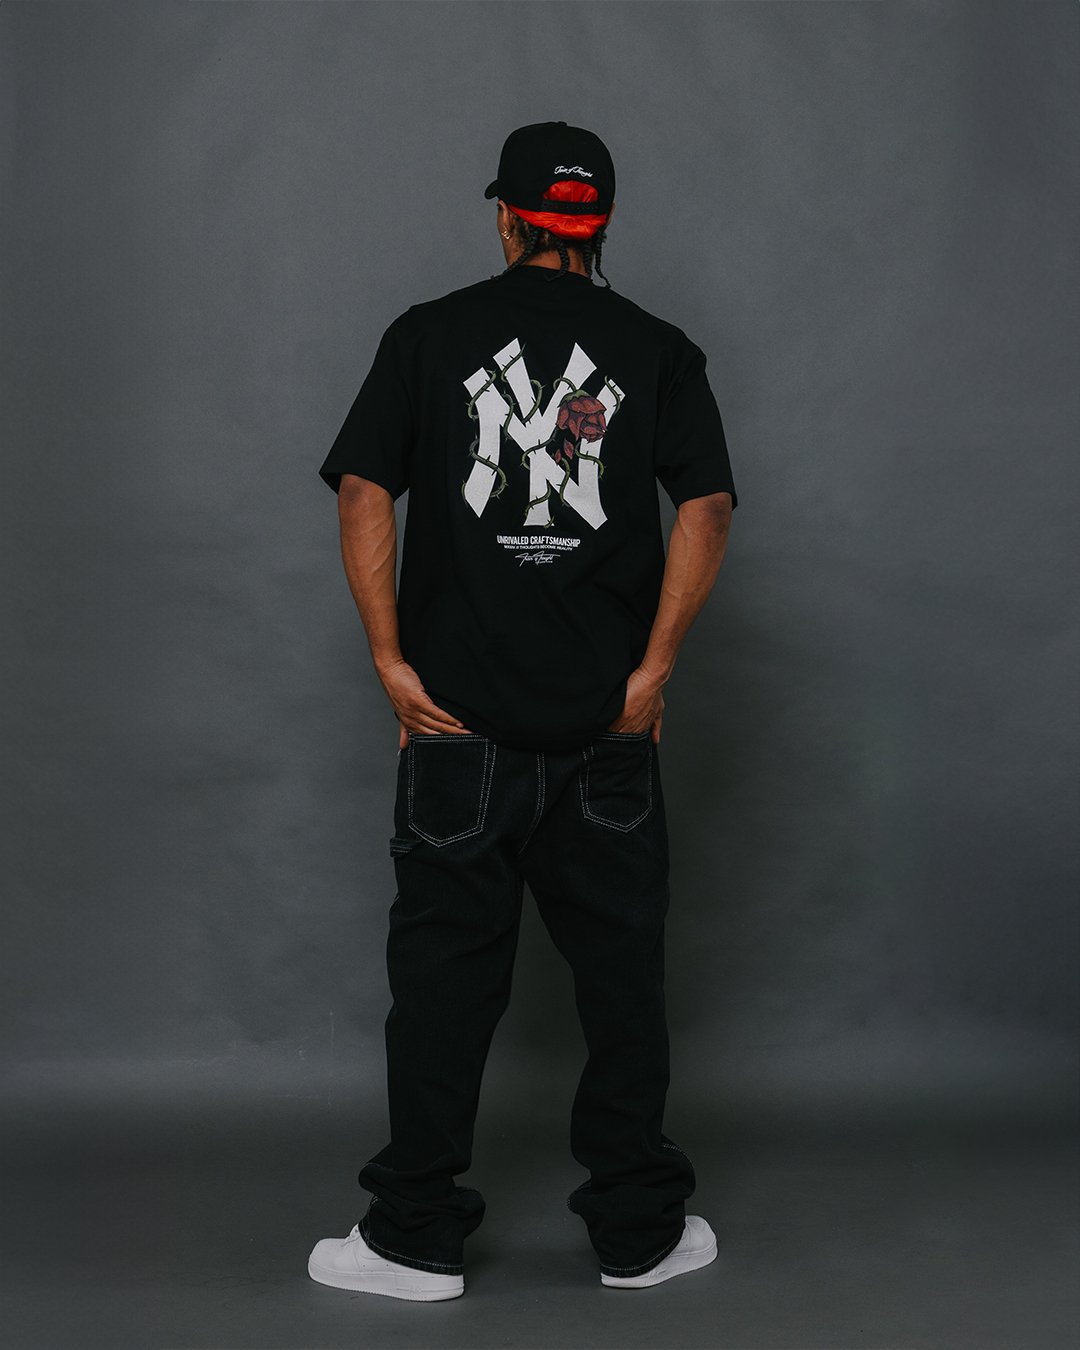 NY City Rose Black Tee - trainofthoughtcollective